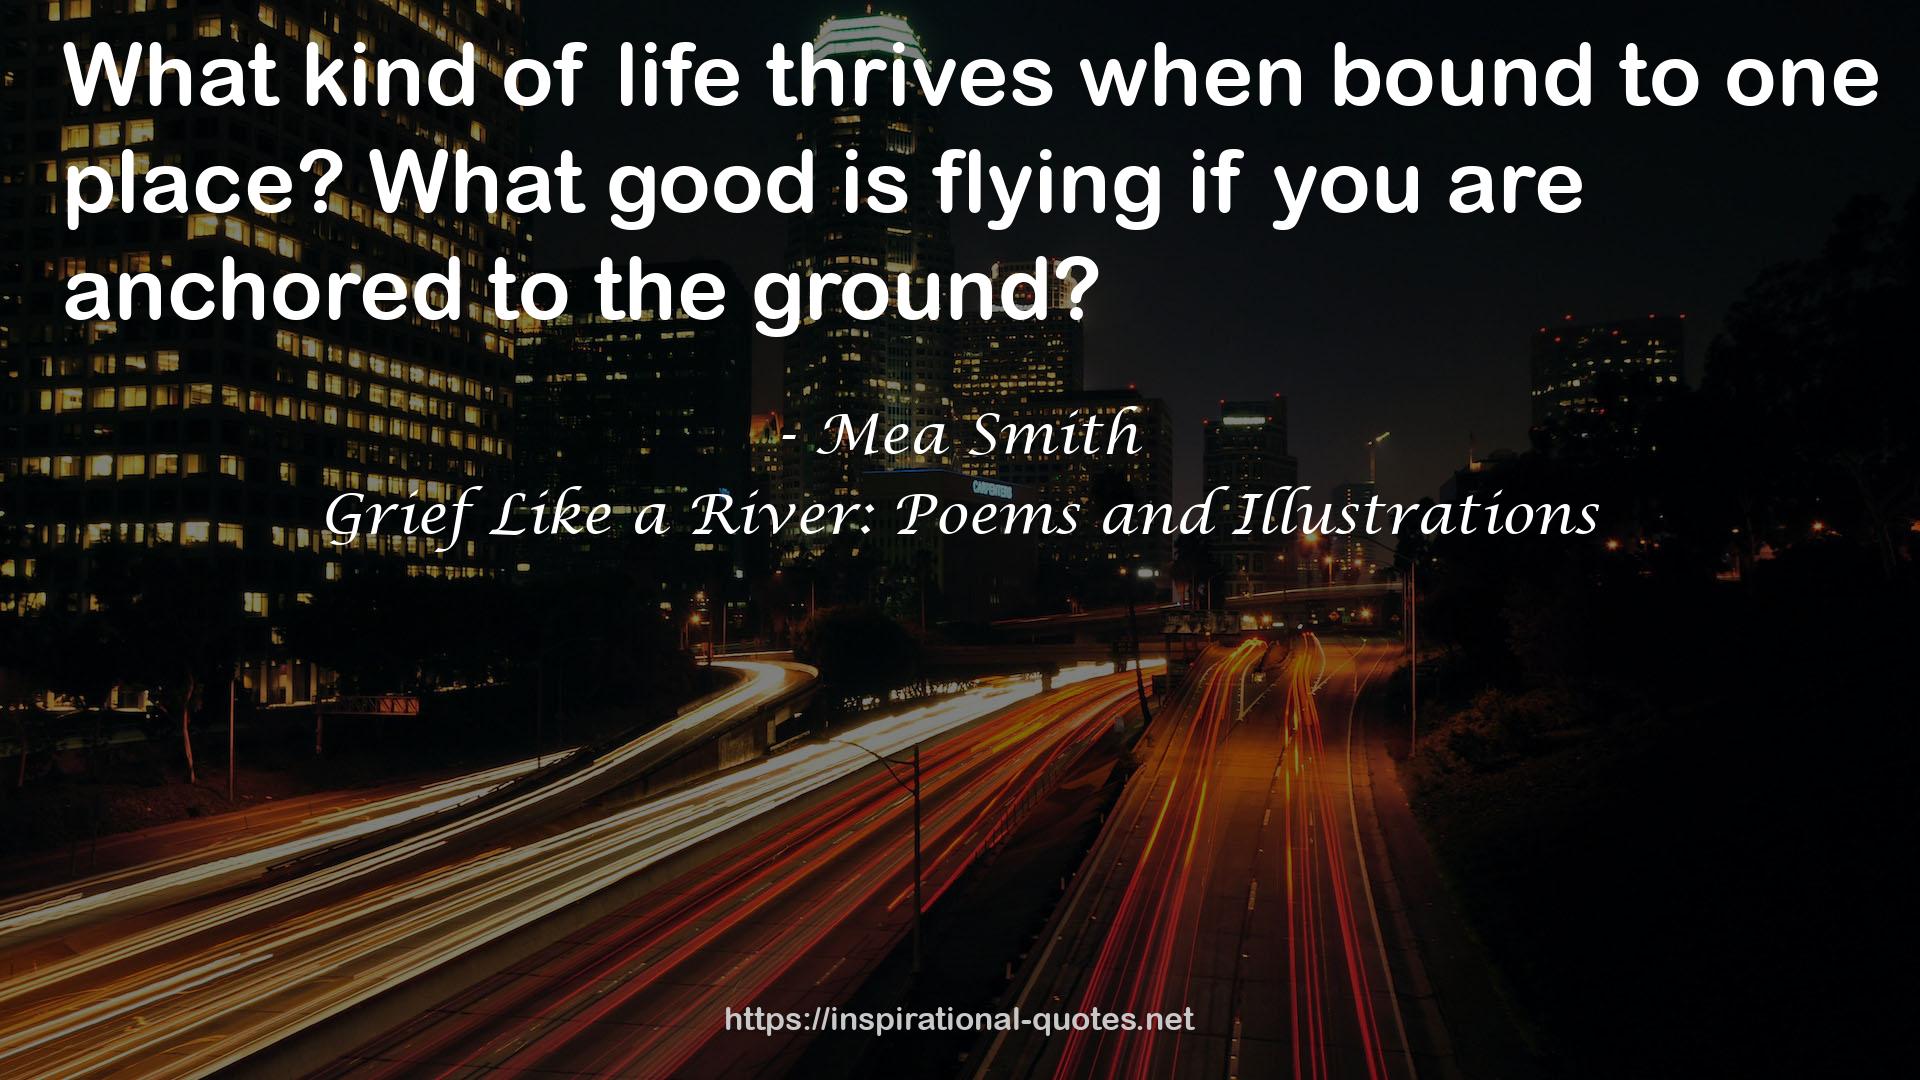 Grief Like a River: Poems and Illustrations QUOTES